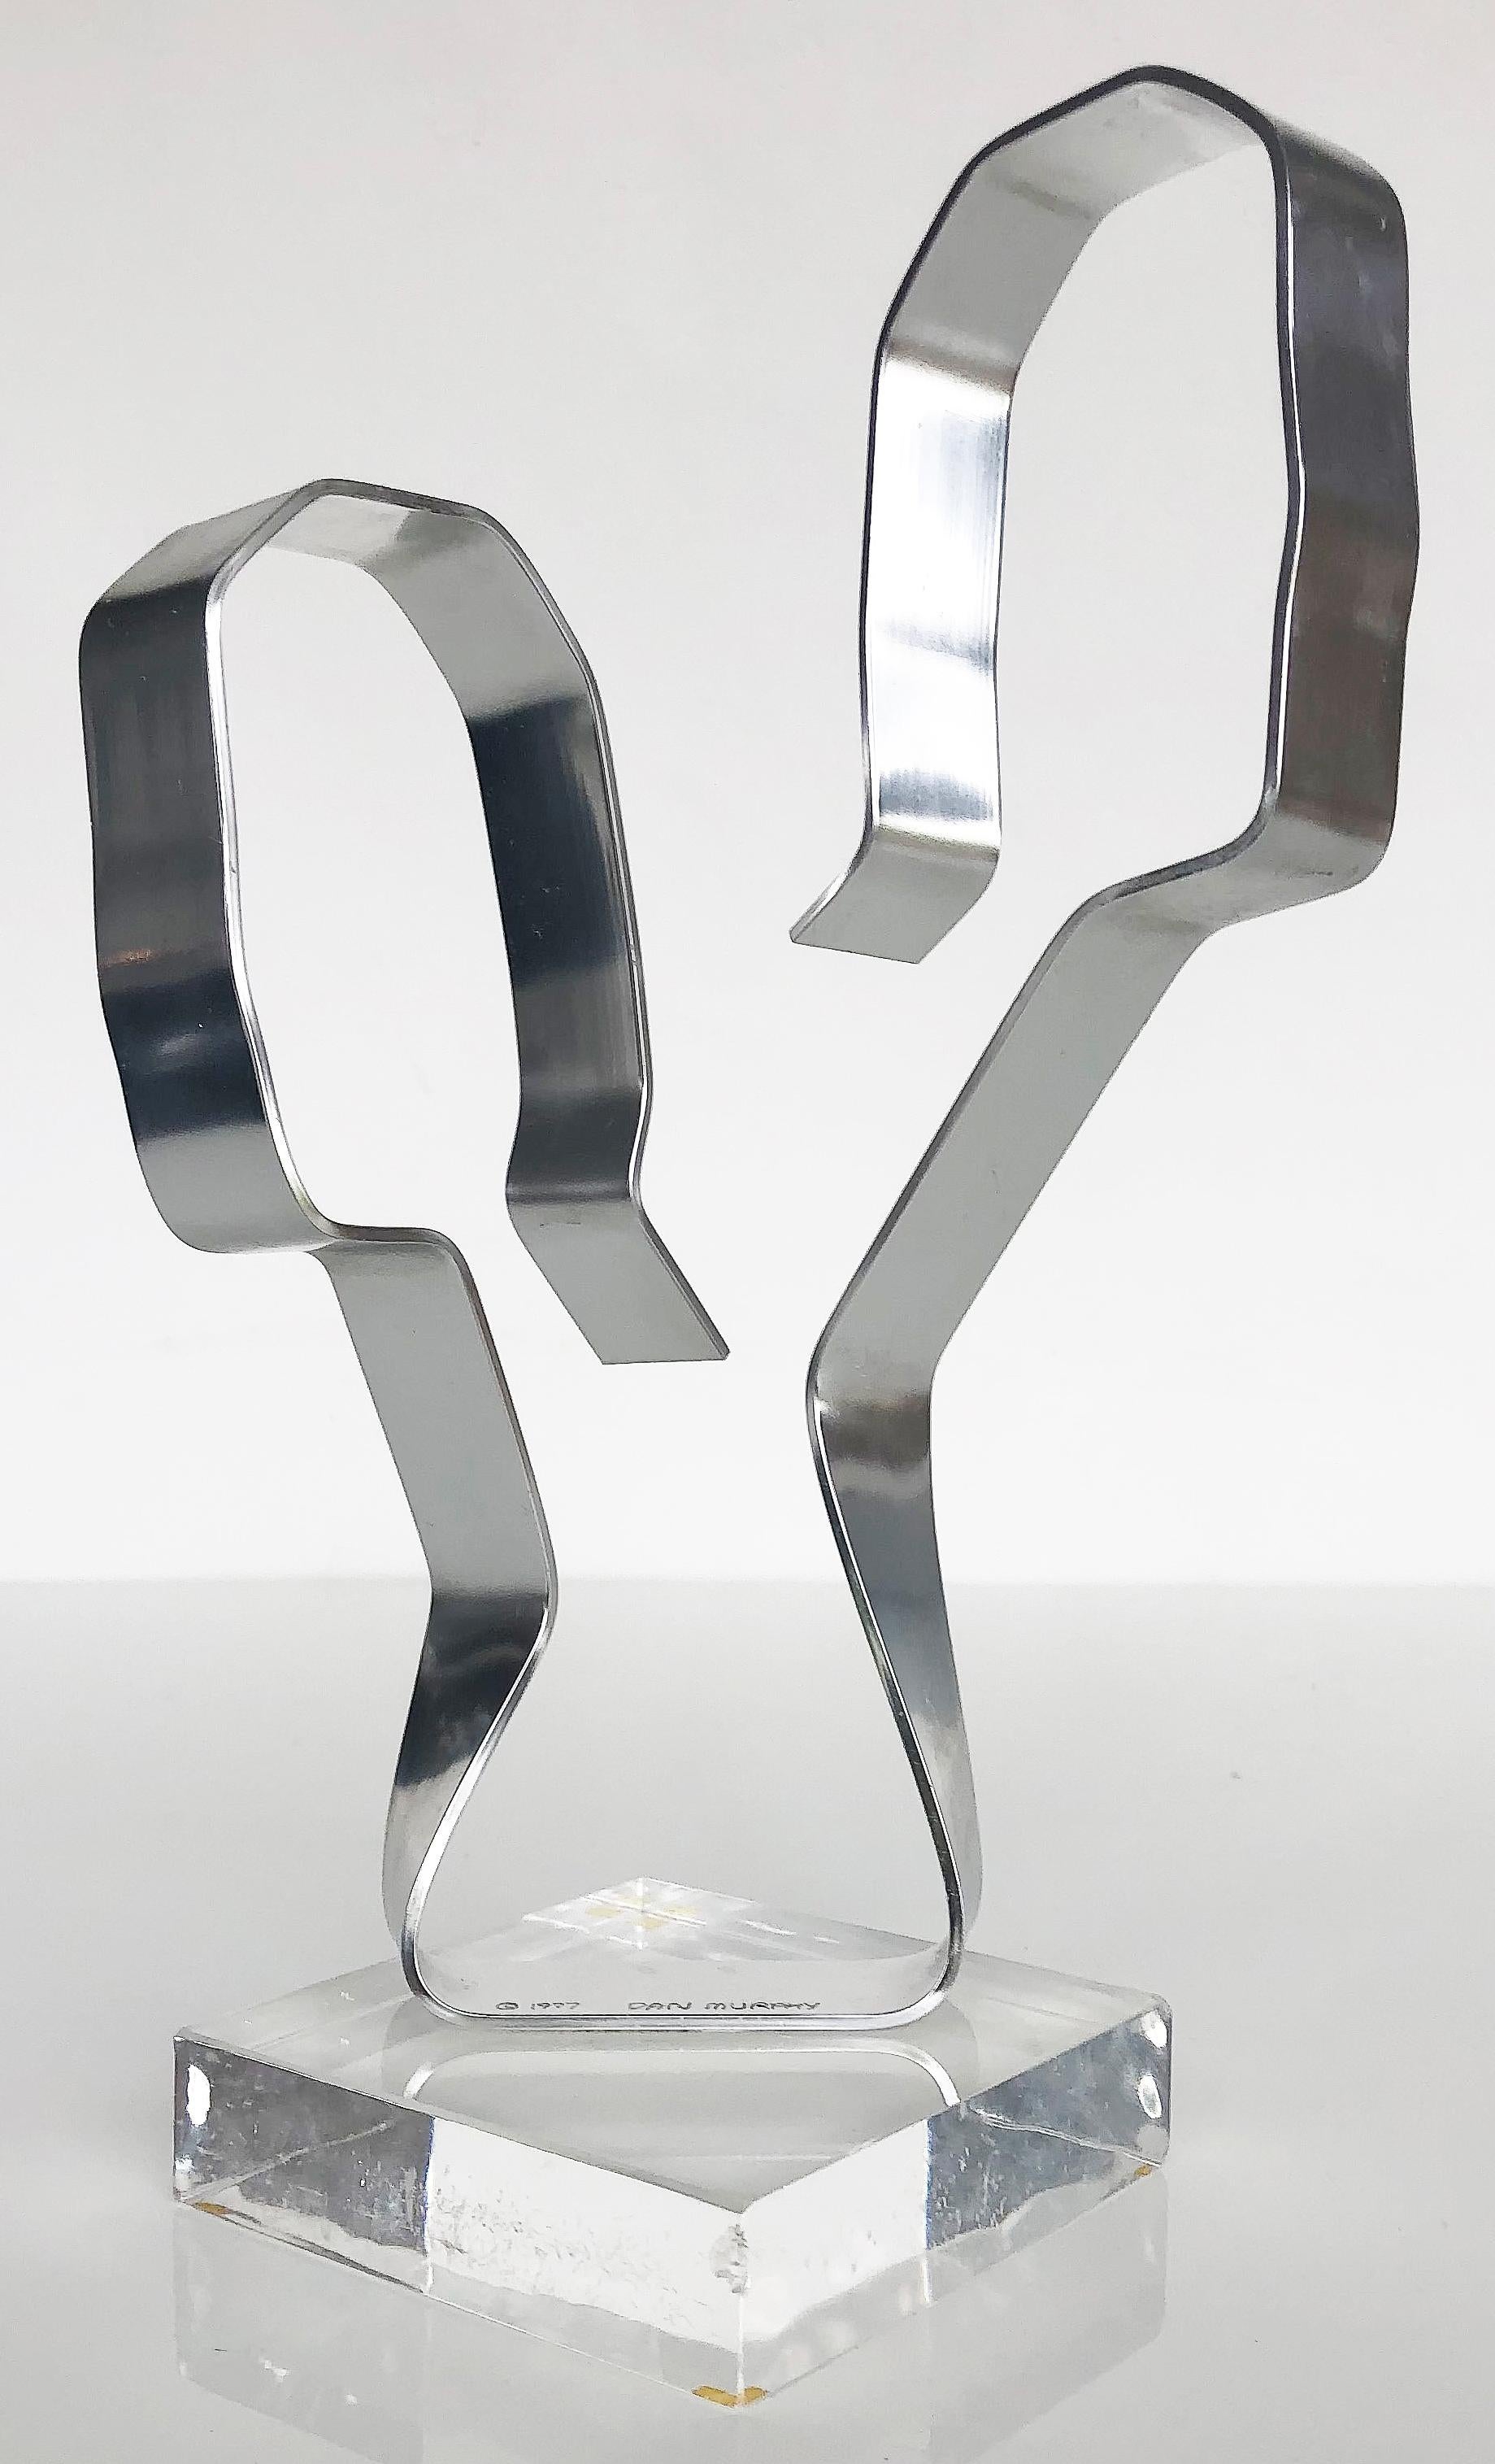 Dan Murphy abstract aluminum free-form sculpture on Lucite, signed & dated 1977

Offered for sale is an abstract polished aluminum free-form sculpture that is supported by a square Lucite base. The sculpture is signed at the bottom and dated